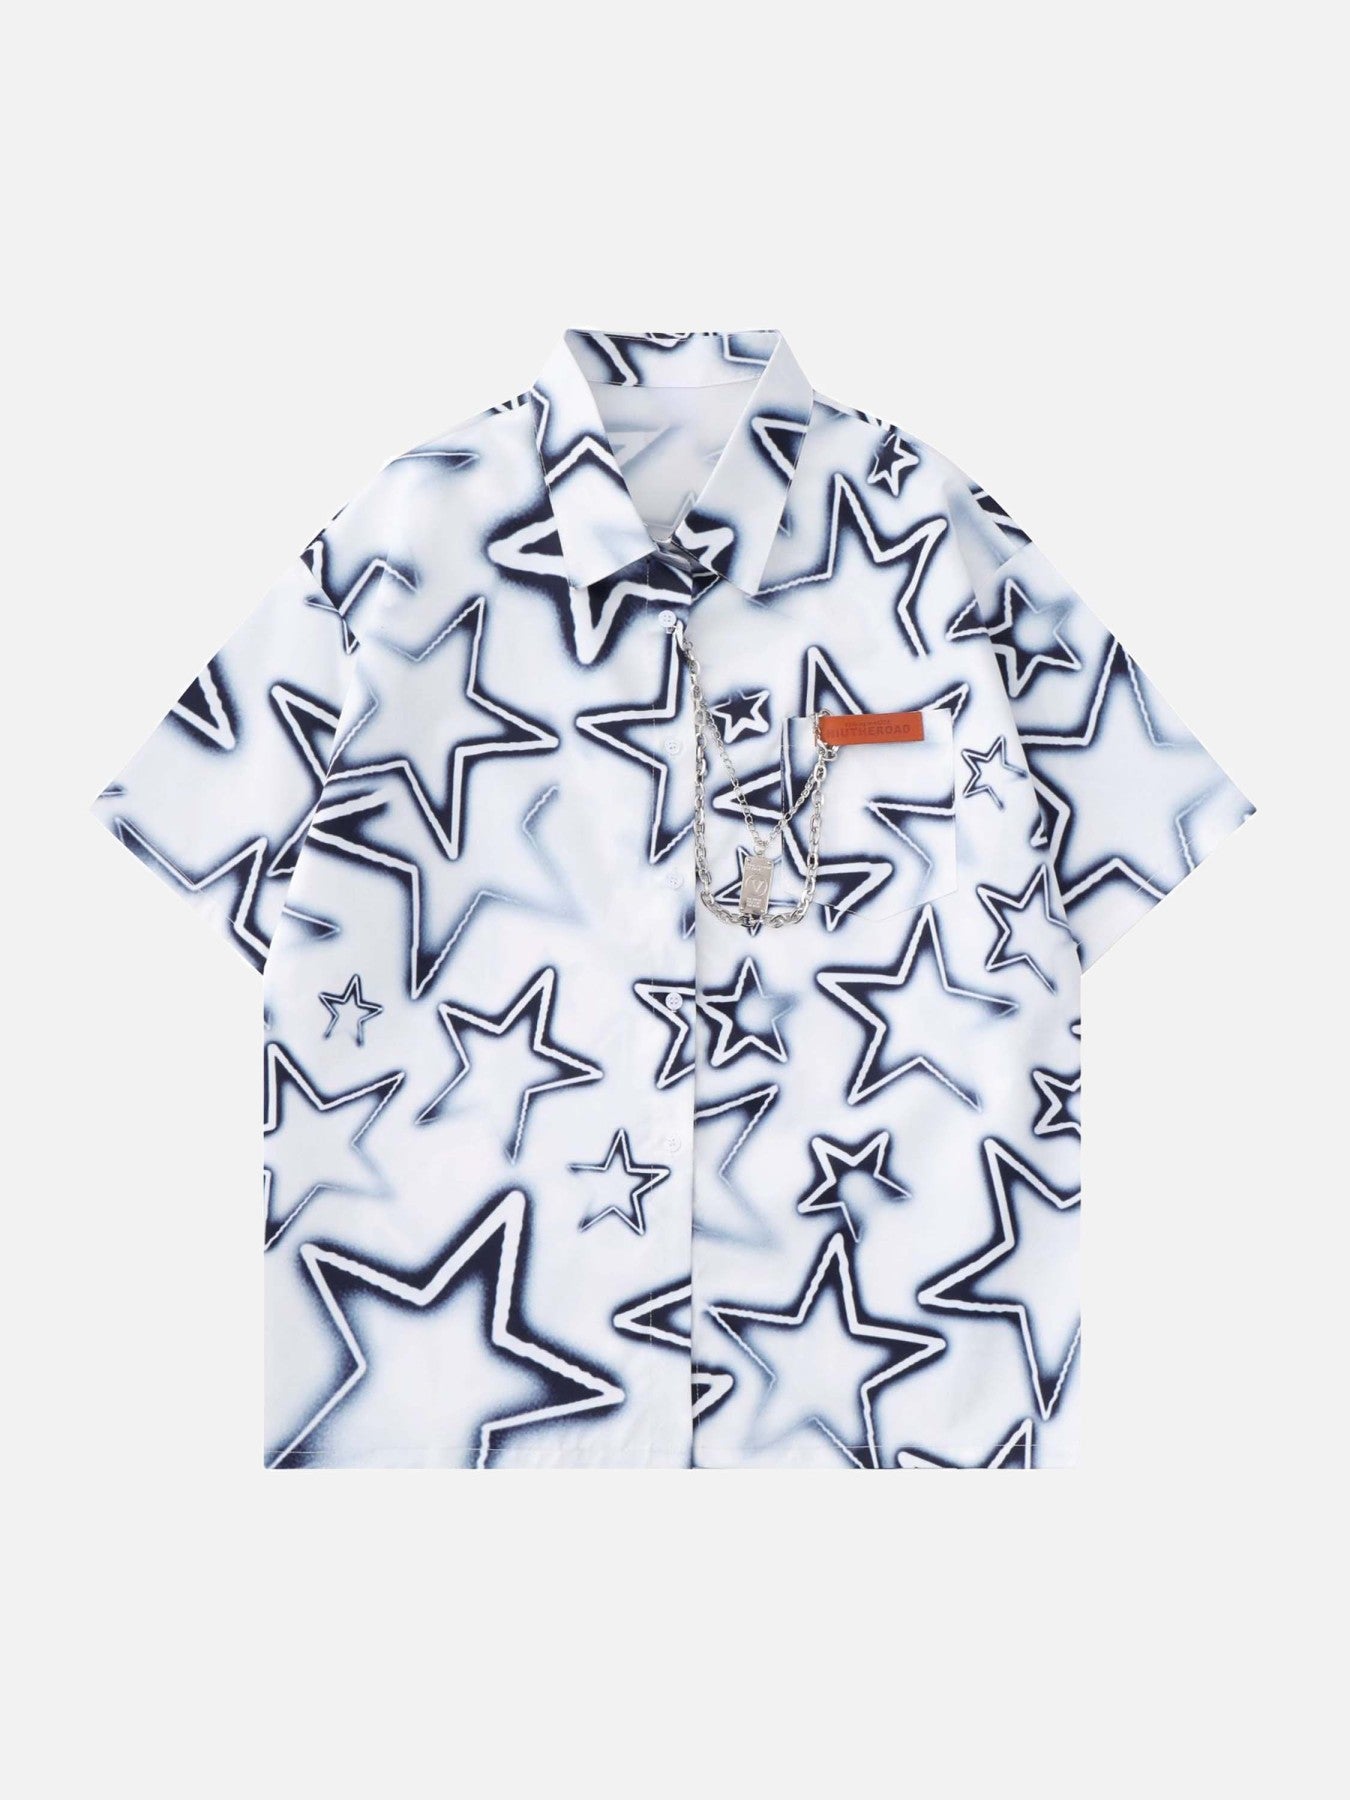 The Supermade Chain Decorated Star Shirt